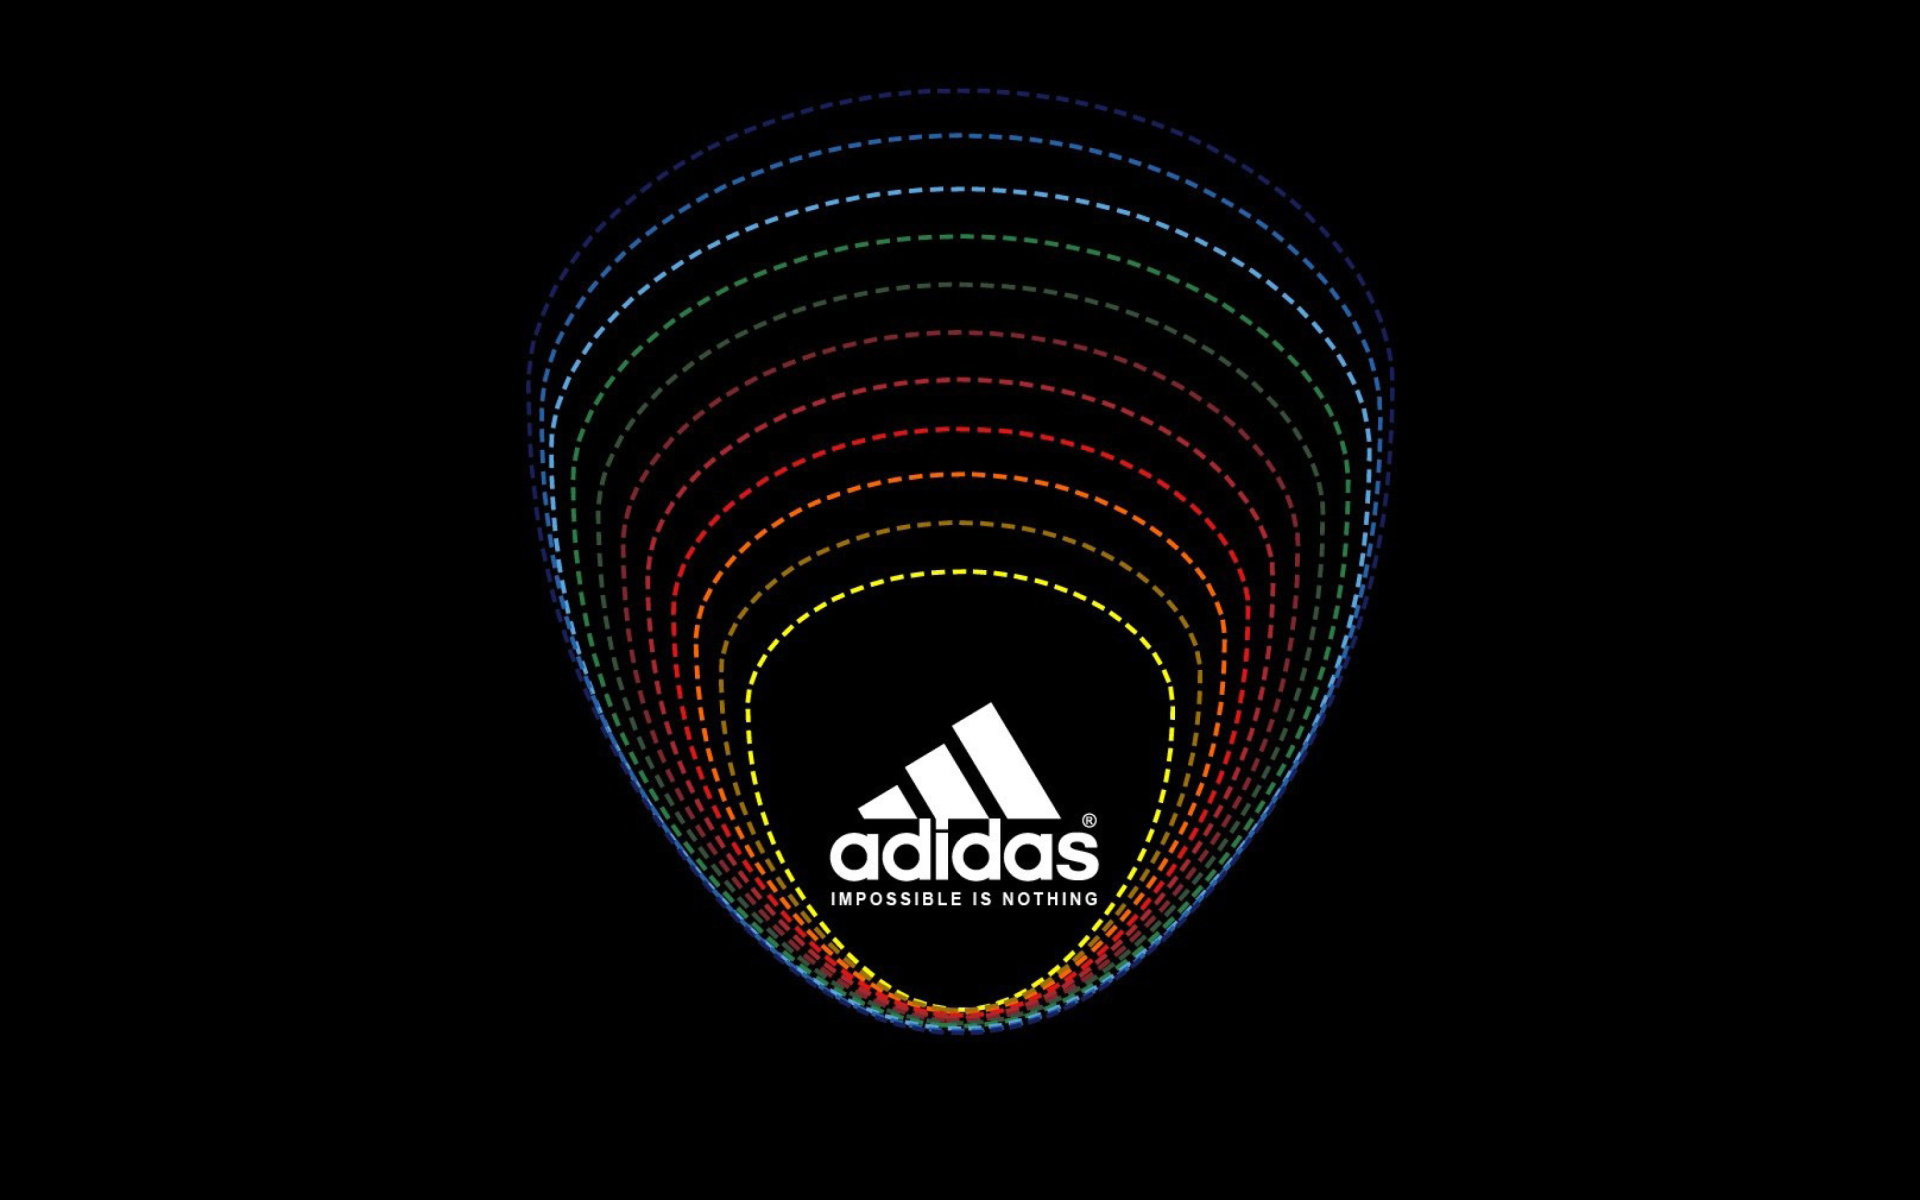 Das Adidas Tagline, Impossible is Nothing Wallpaper 1920x1200